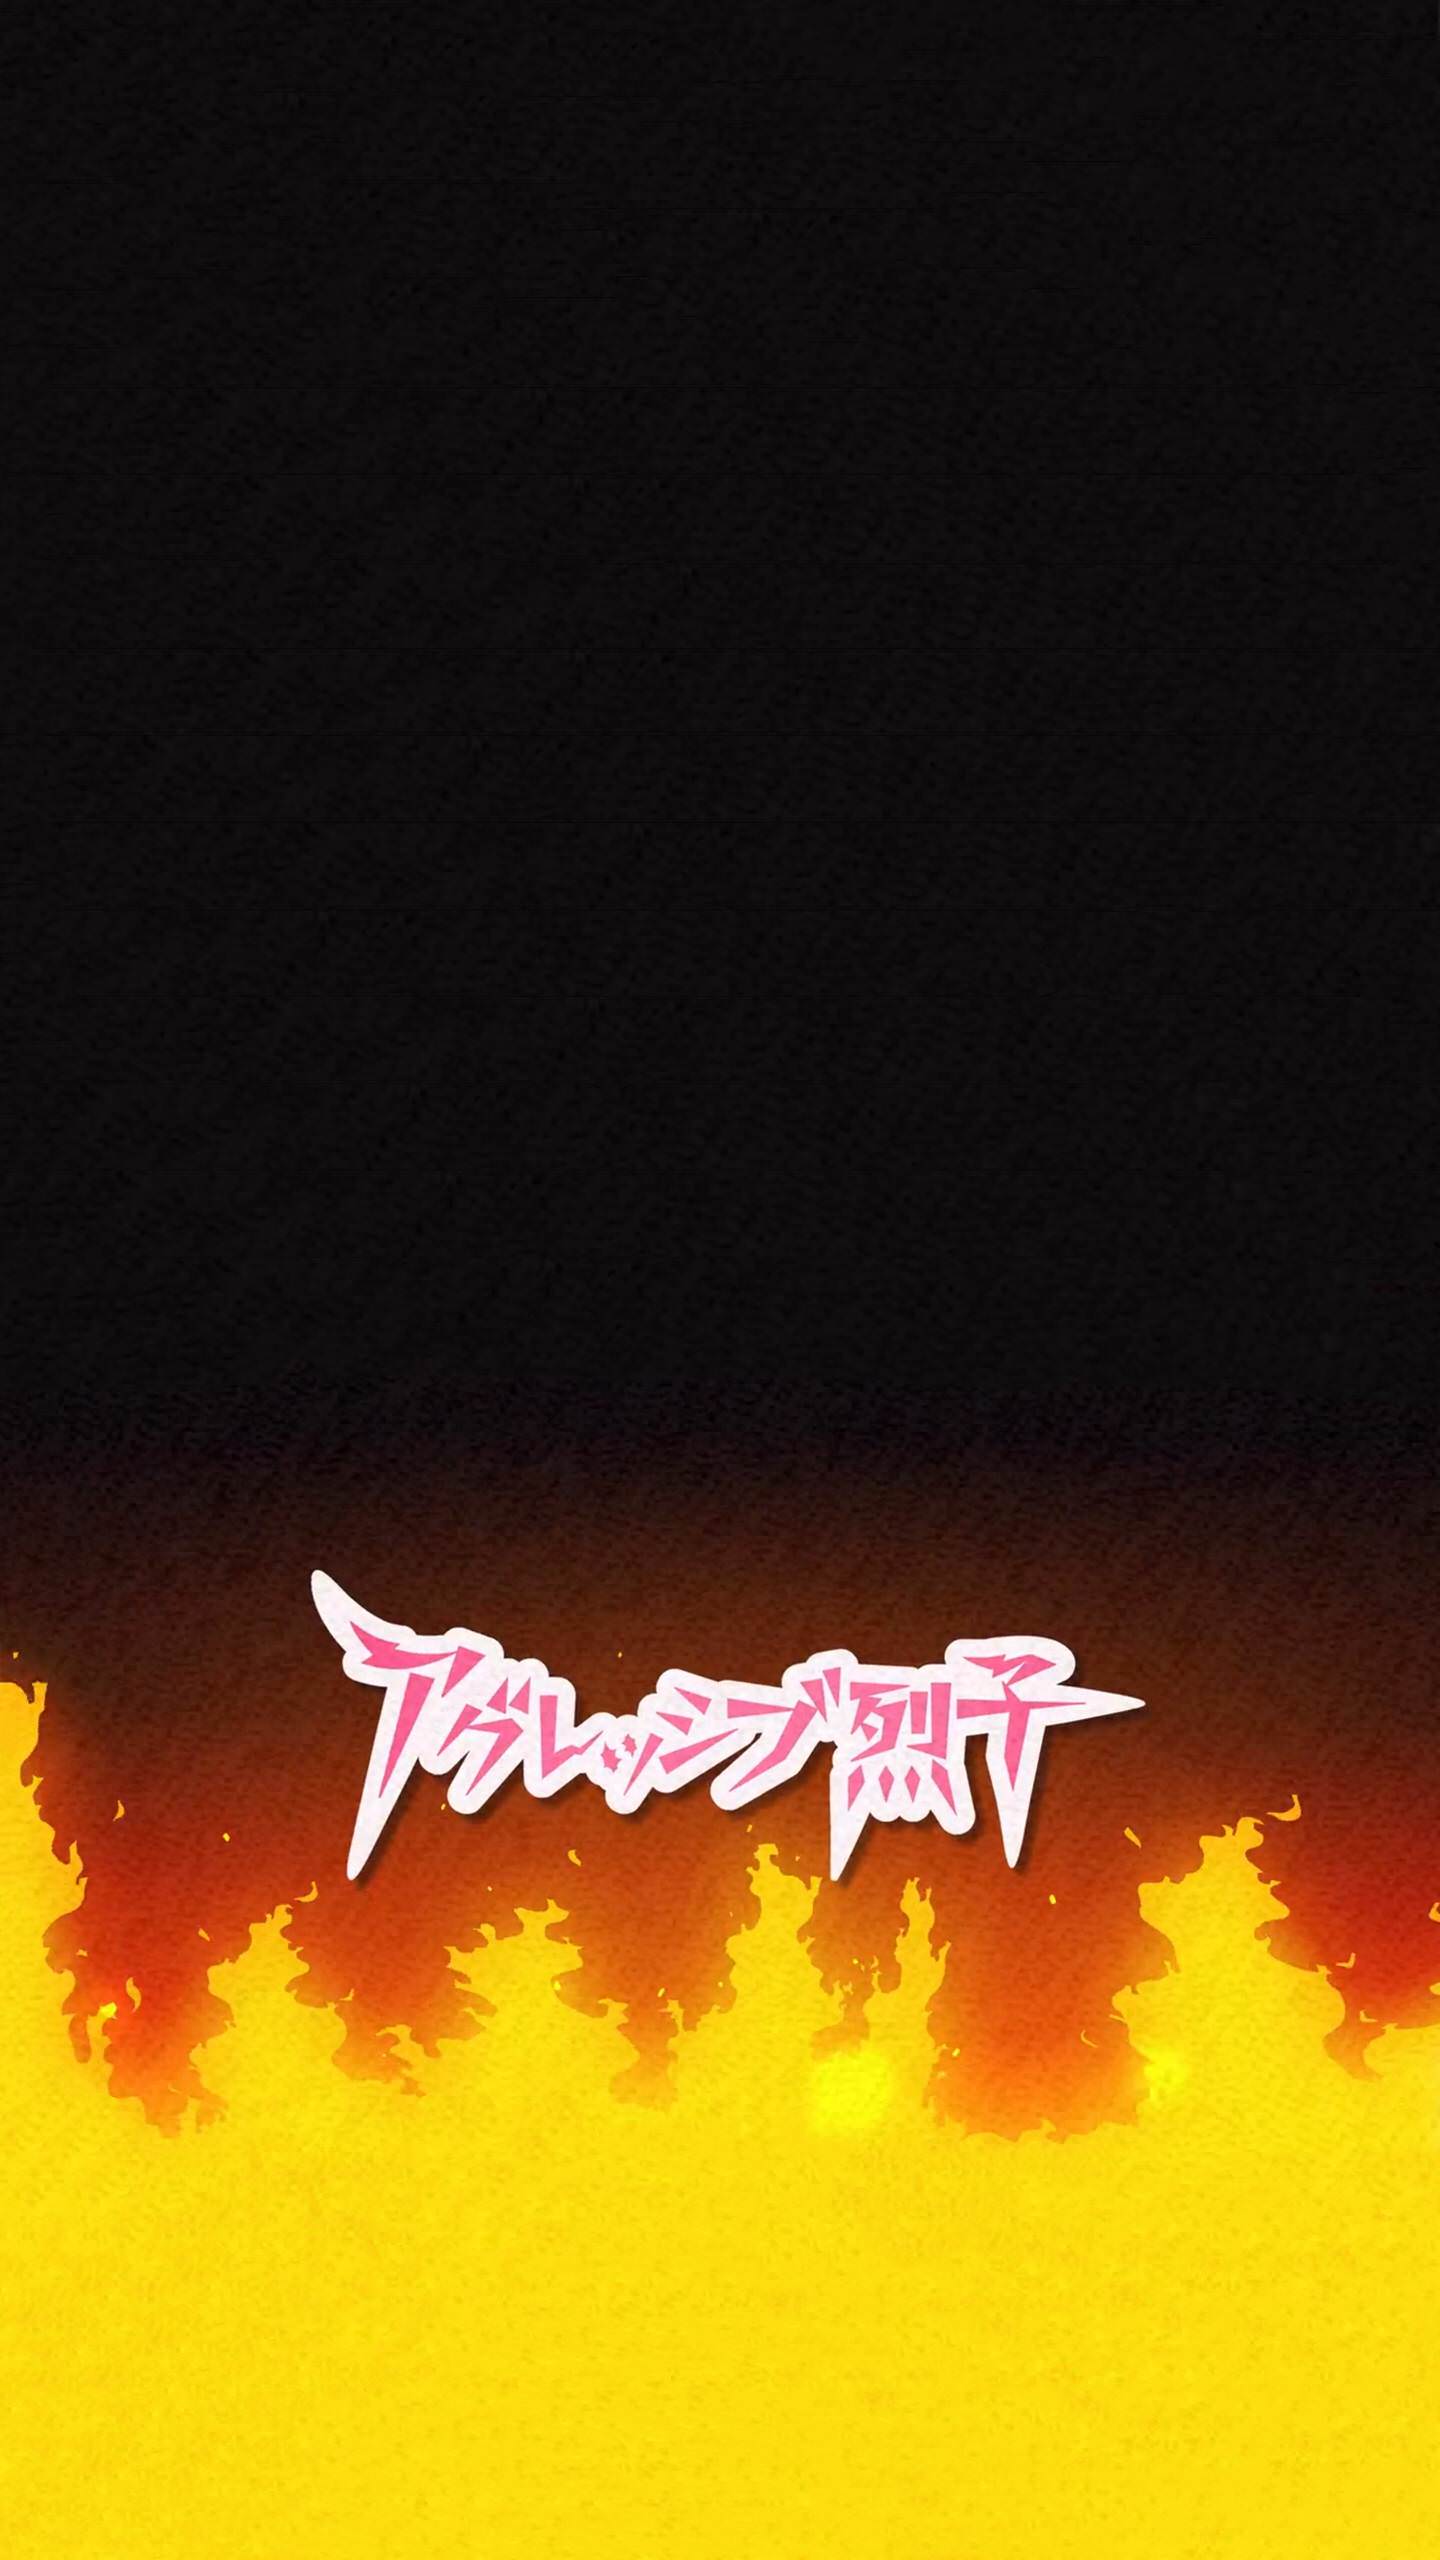 Phone wallpaper i made from the title screen (1440x2560)